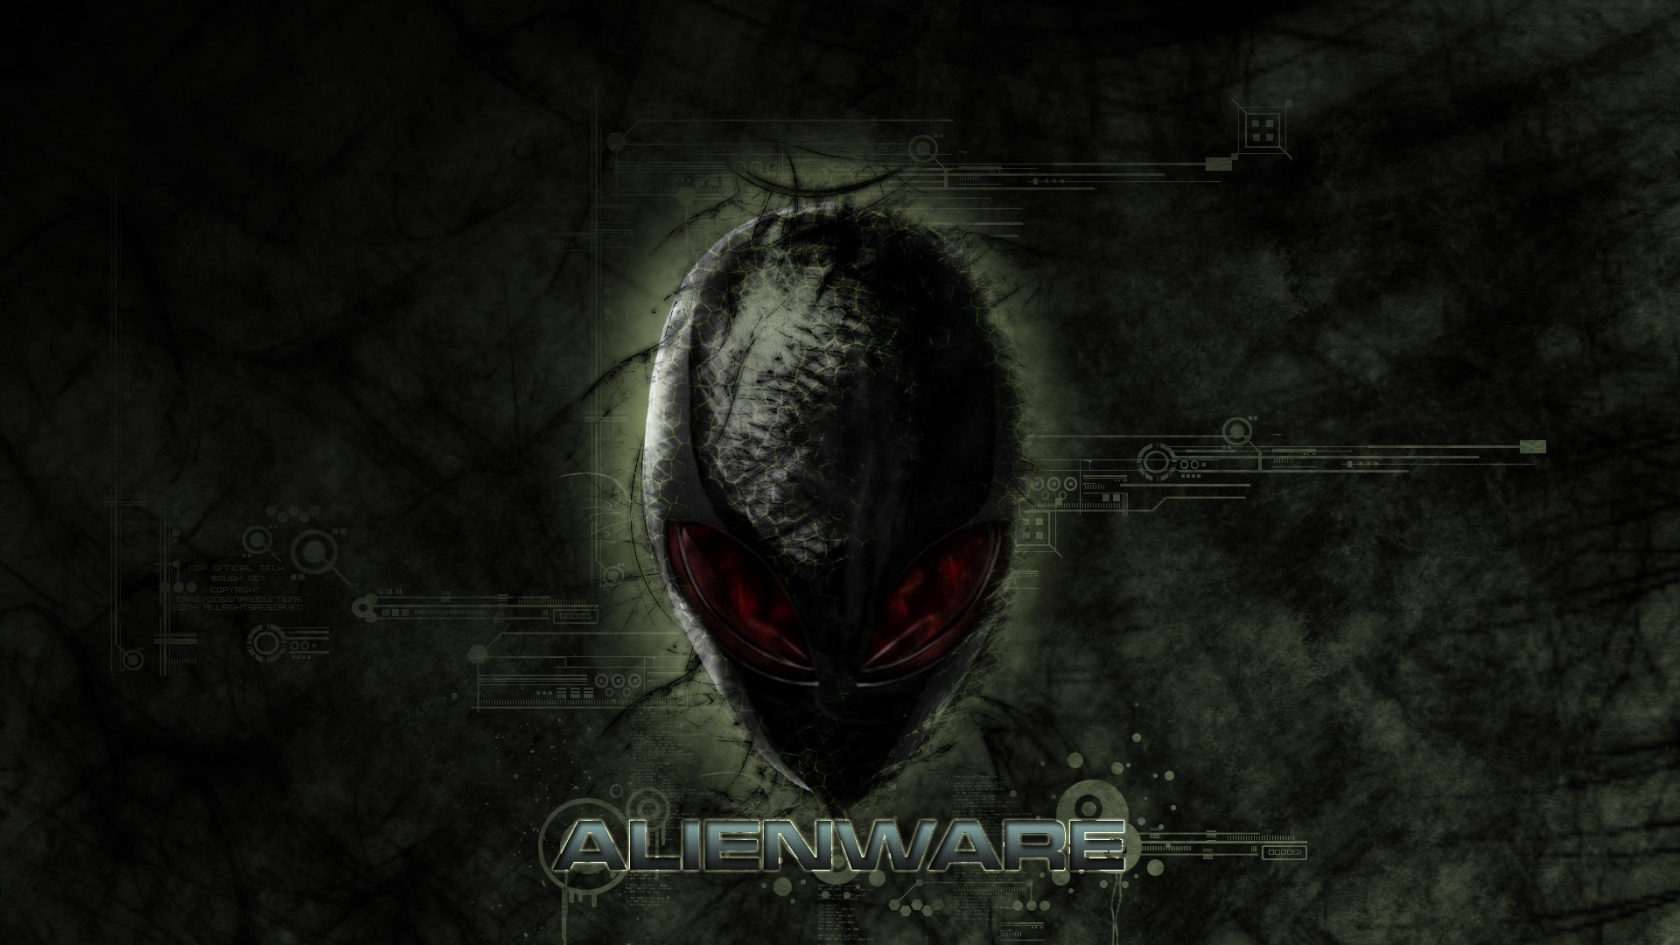 Cool Alienware for 1680 x 945 HDTV resolution